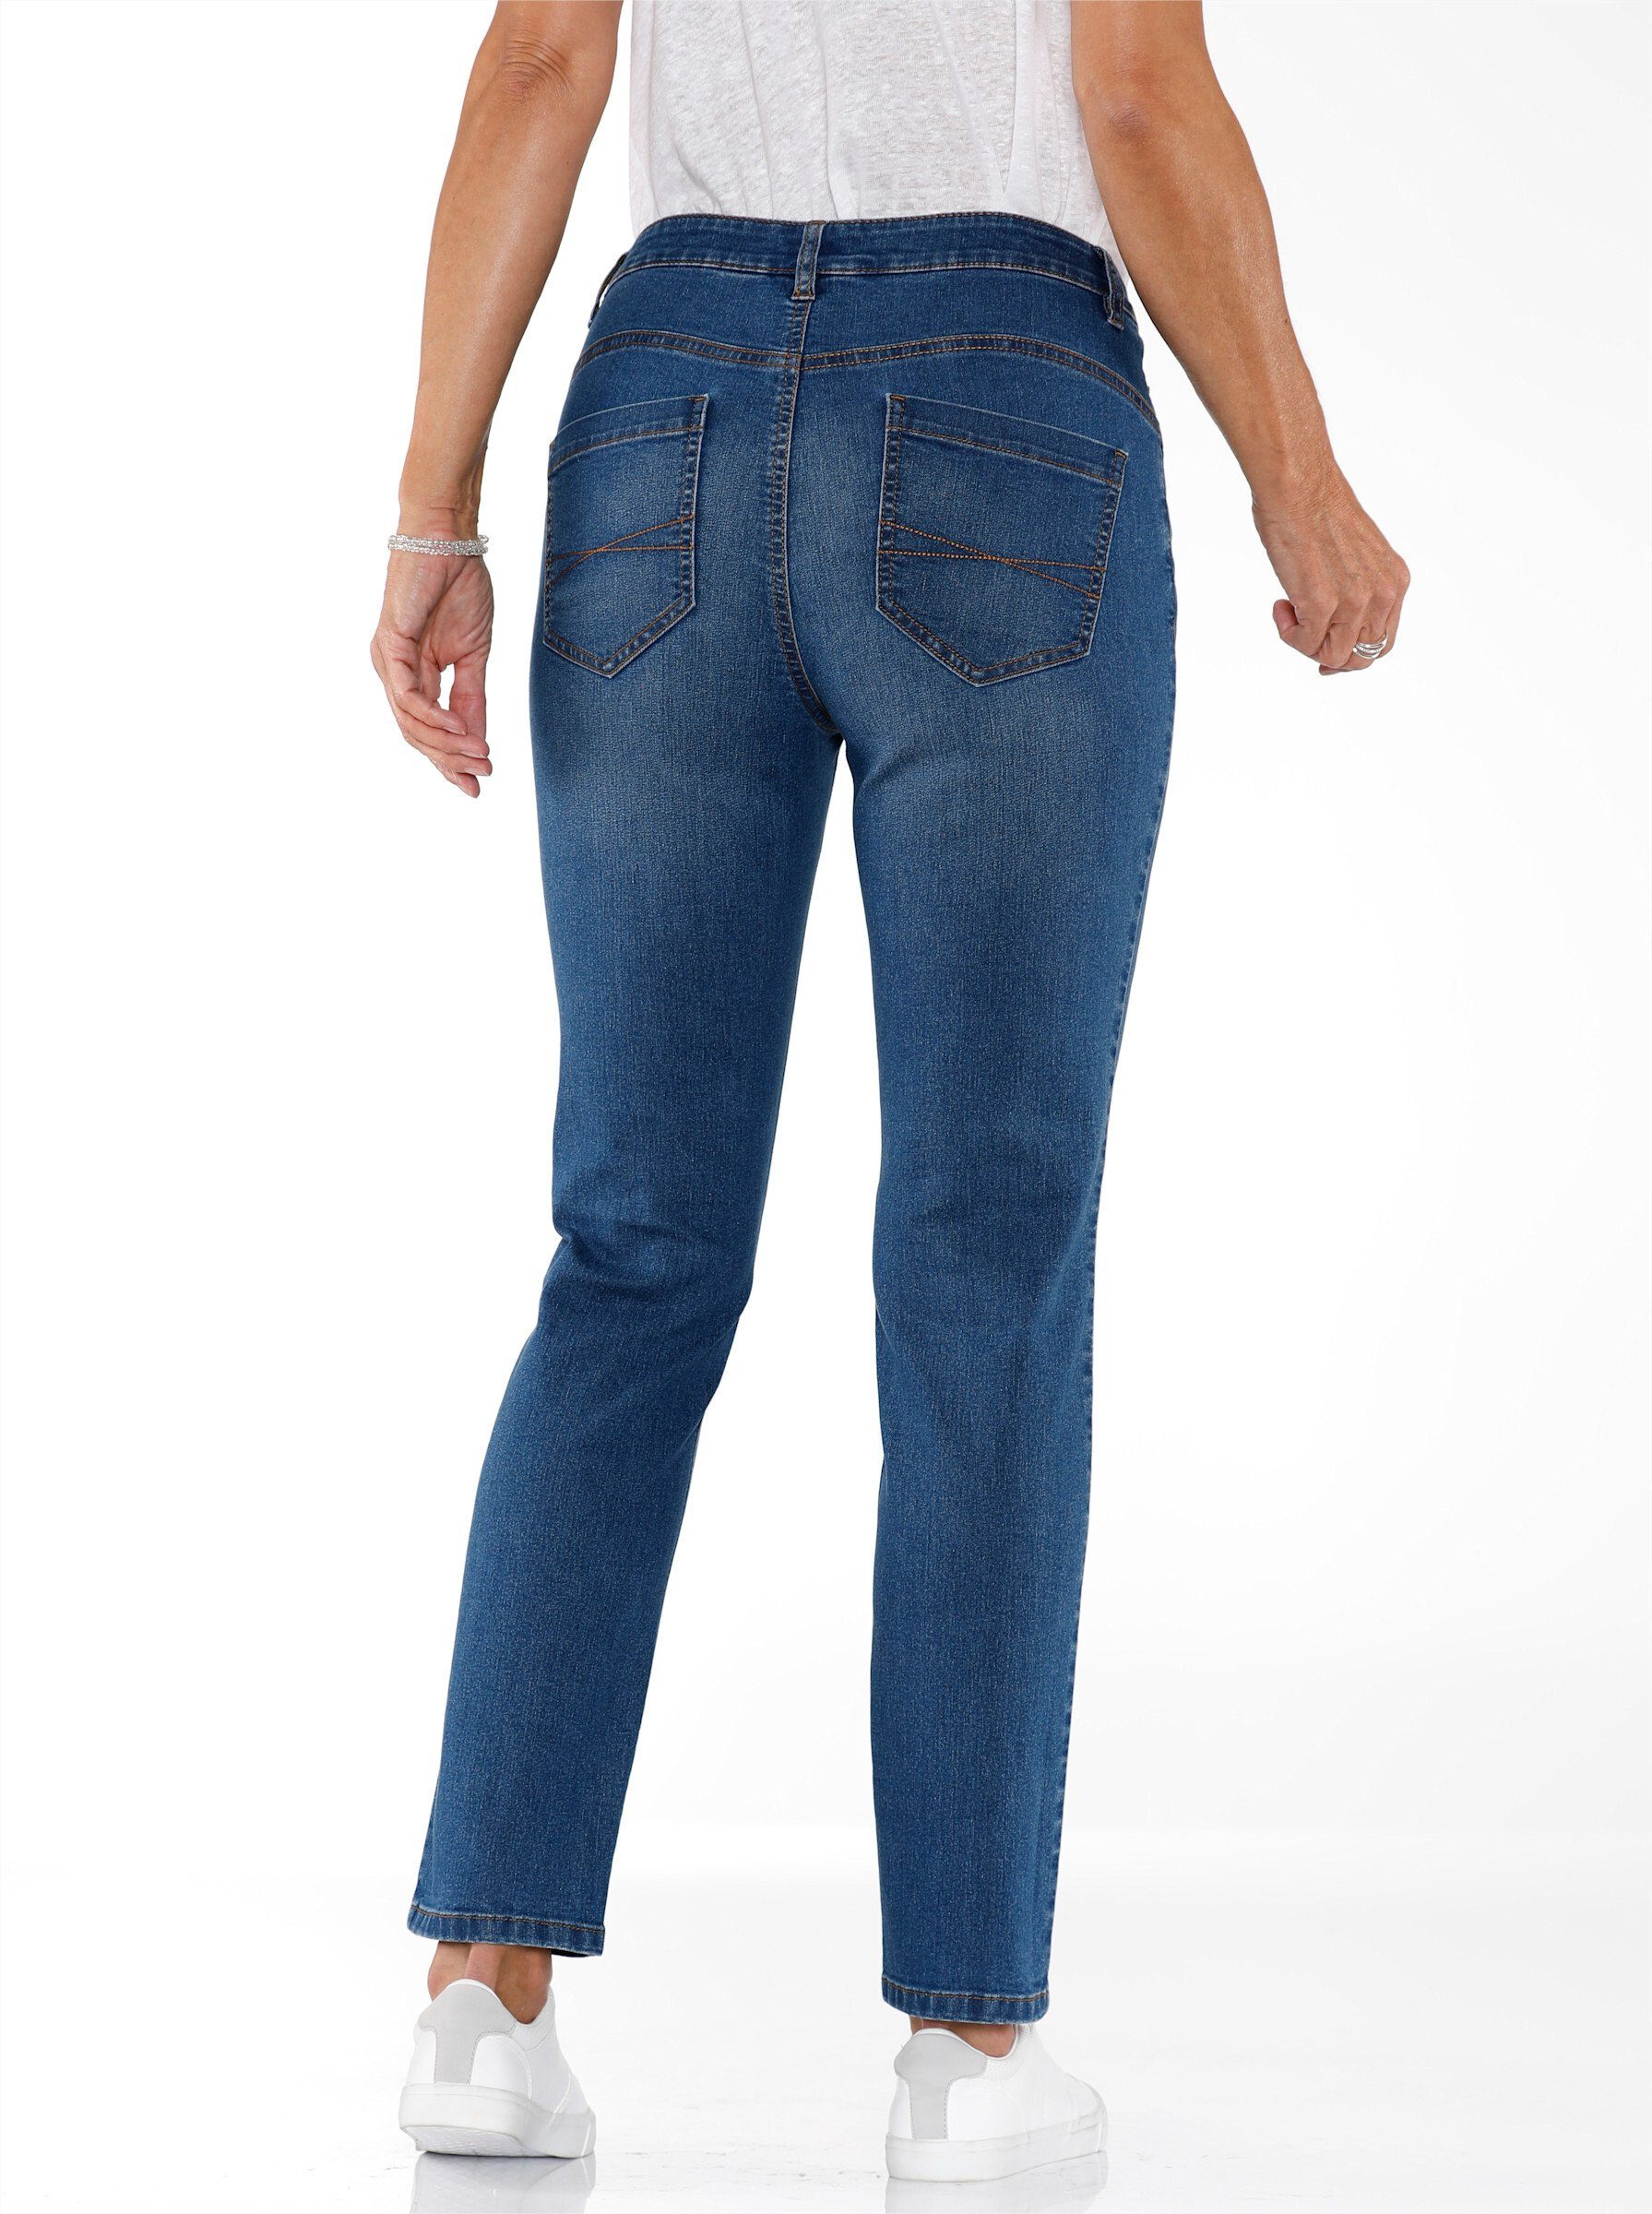 Bequeme blue-stone-washed Jeans Sieh an!